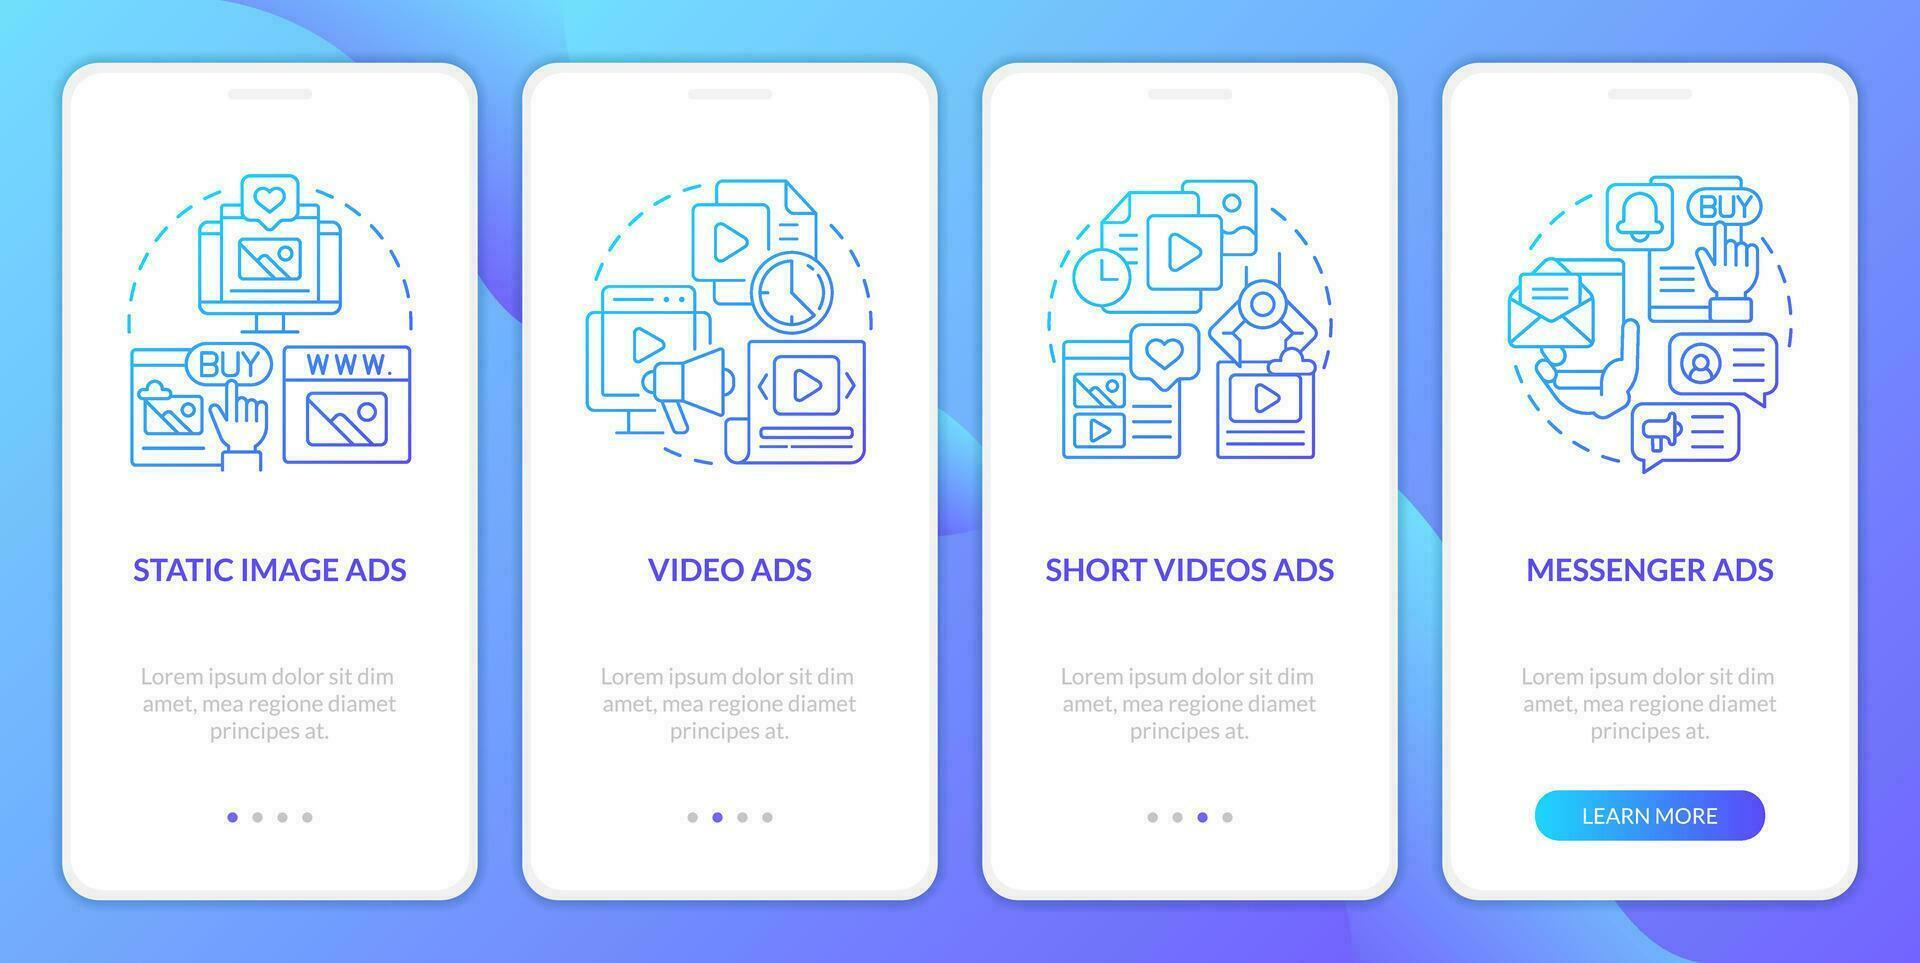 Types of social media ads blue gradient onboarding mobile app screen. Promo walkthrough 4 steps graphic instructions with linear concepts. UI, UX, GUI template vector